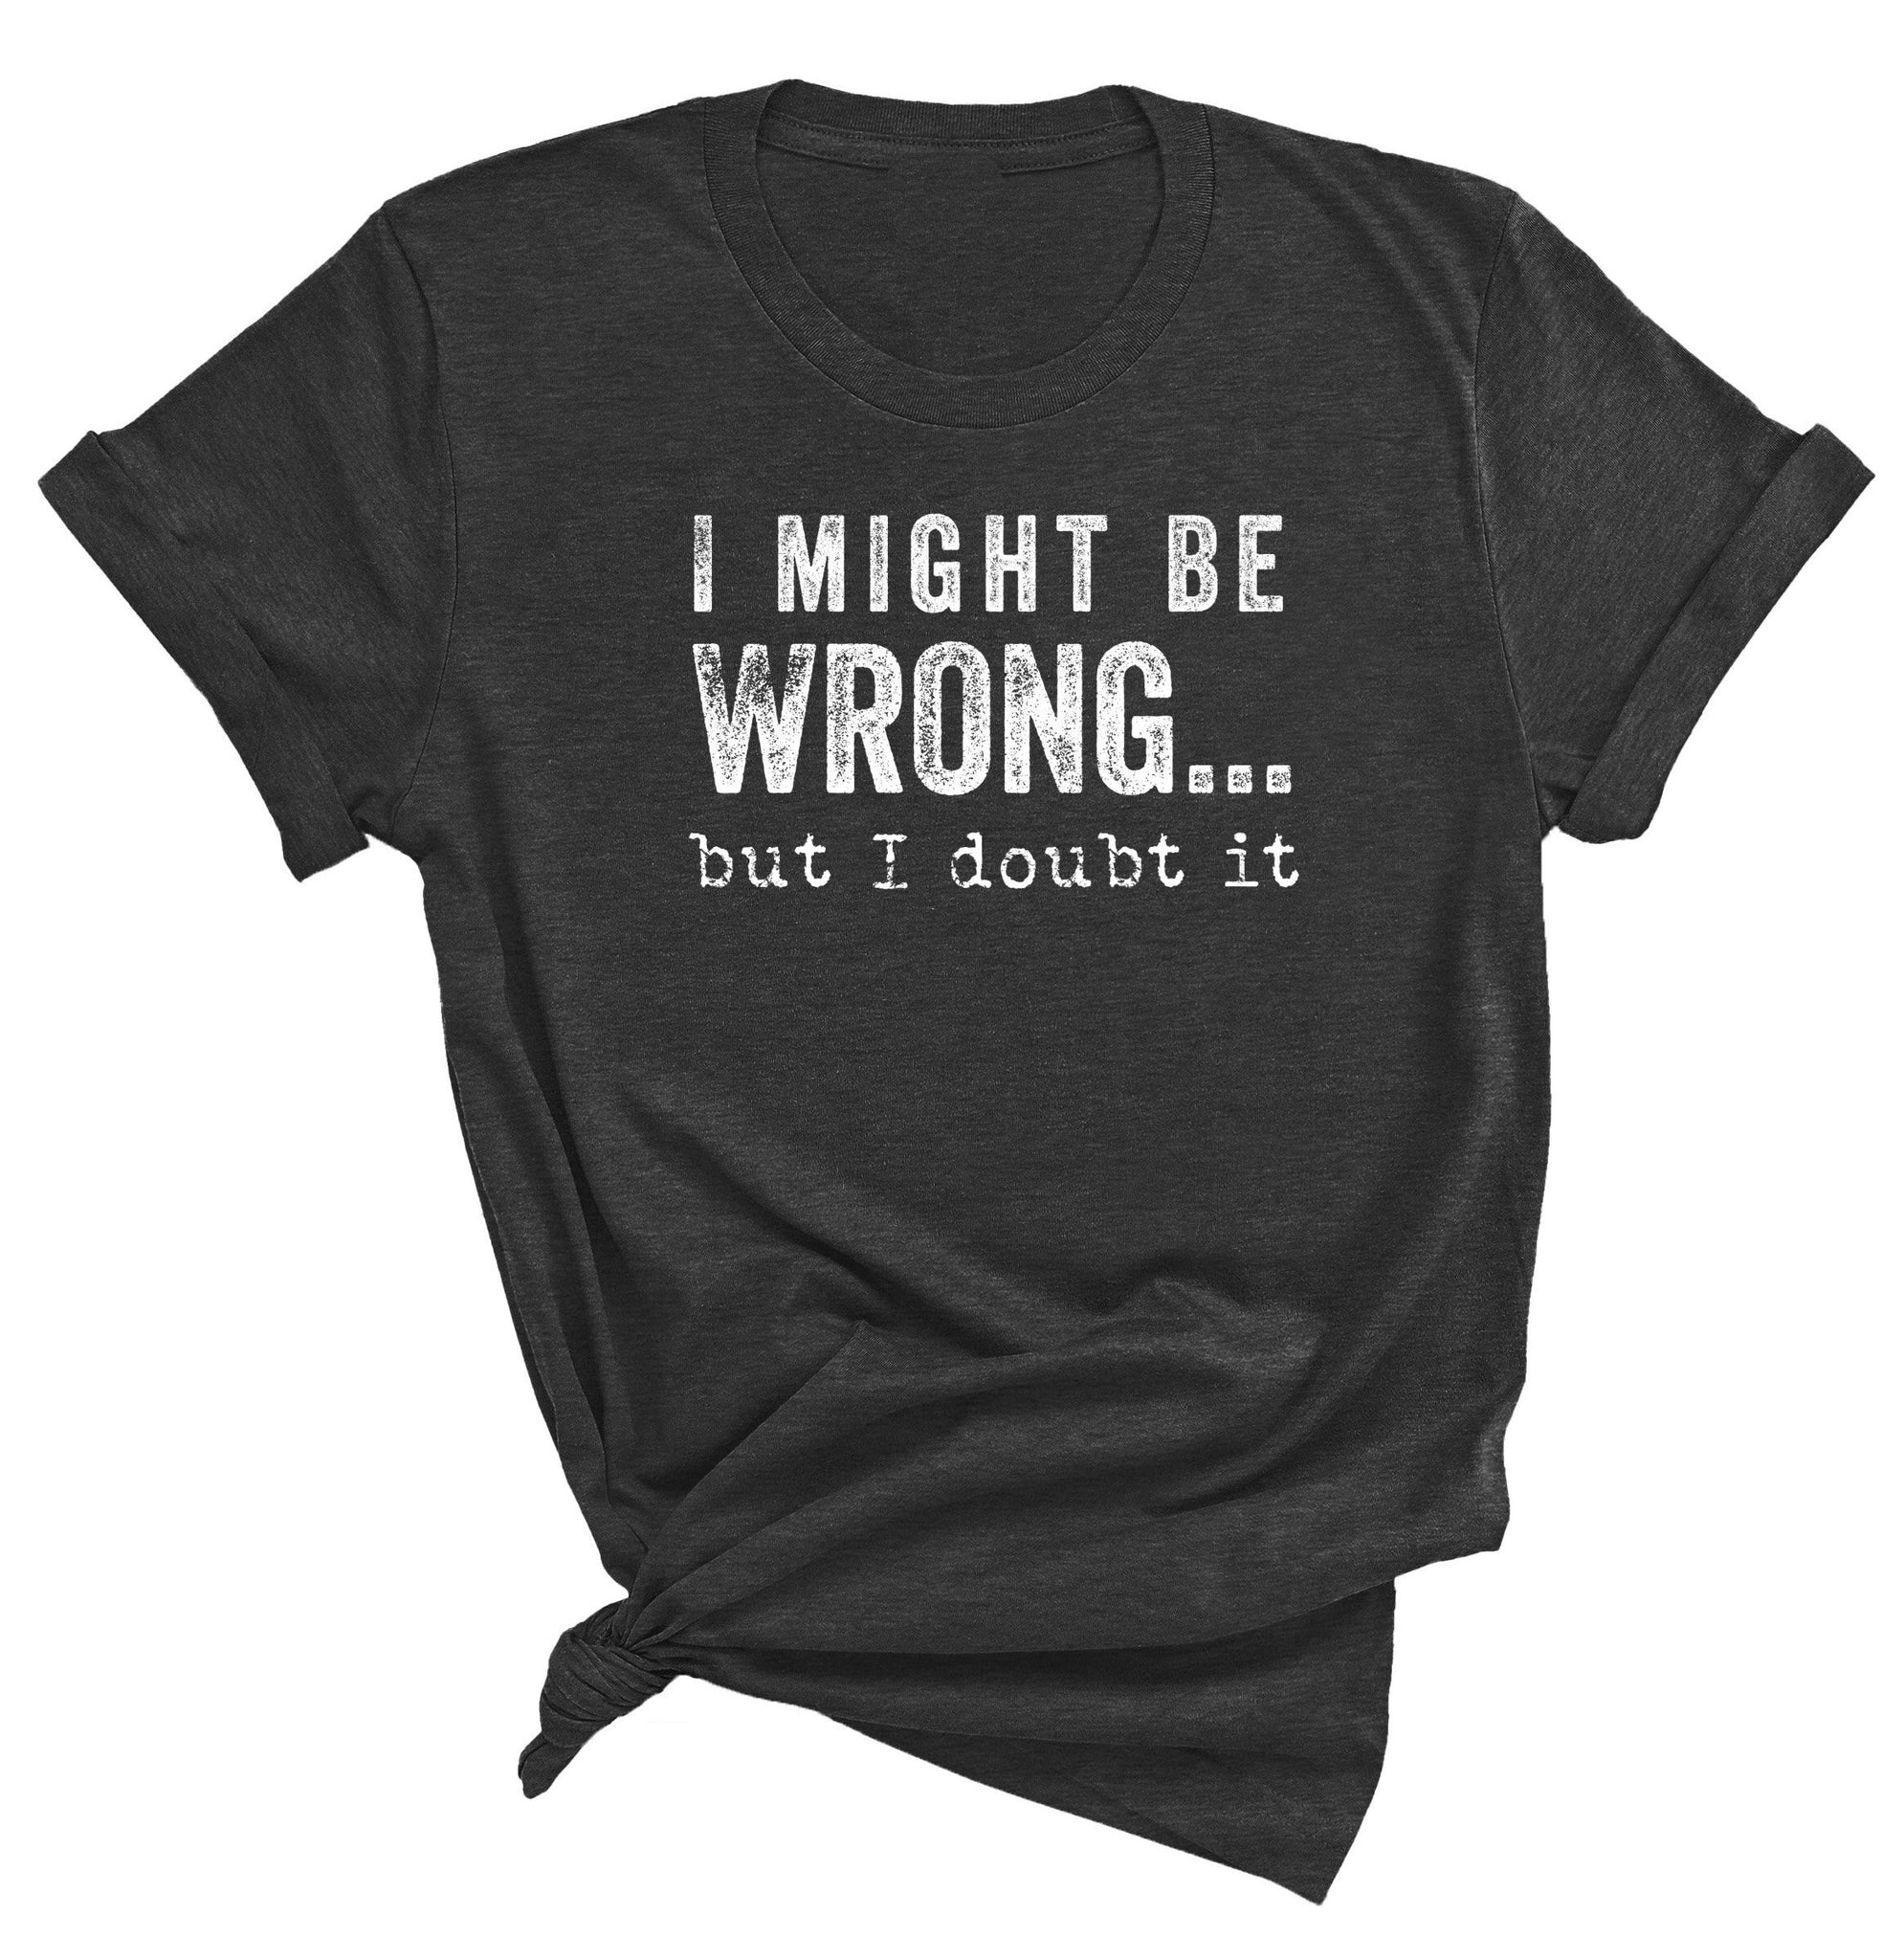 I MIGHT BE WRONG BUT I DOUBT IT T-SHIRT